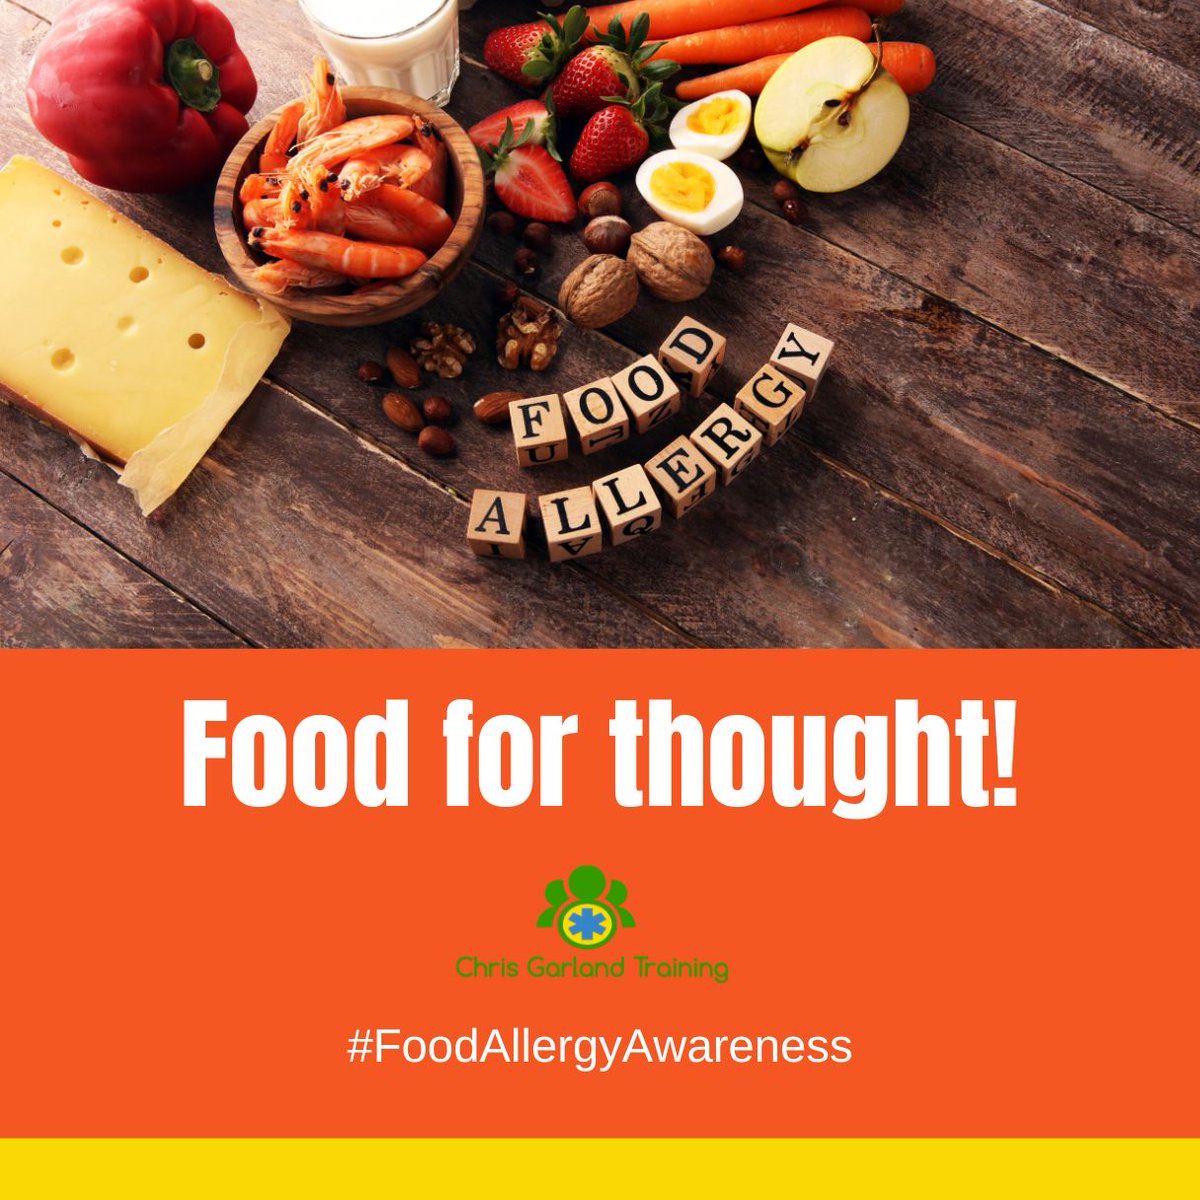 Food Allergy Awareness Week 2024 - The aim of this week is to raise awareness of different food allergies and improve public understanding of what can sometimes be a life-threatening condition. #FoodAllergy #FoodAllergyAwareness